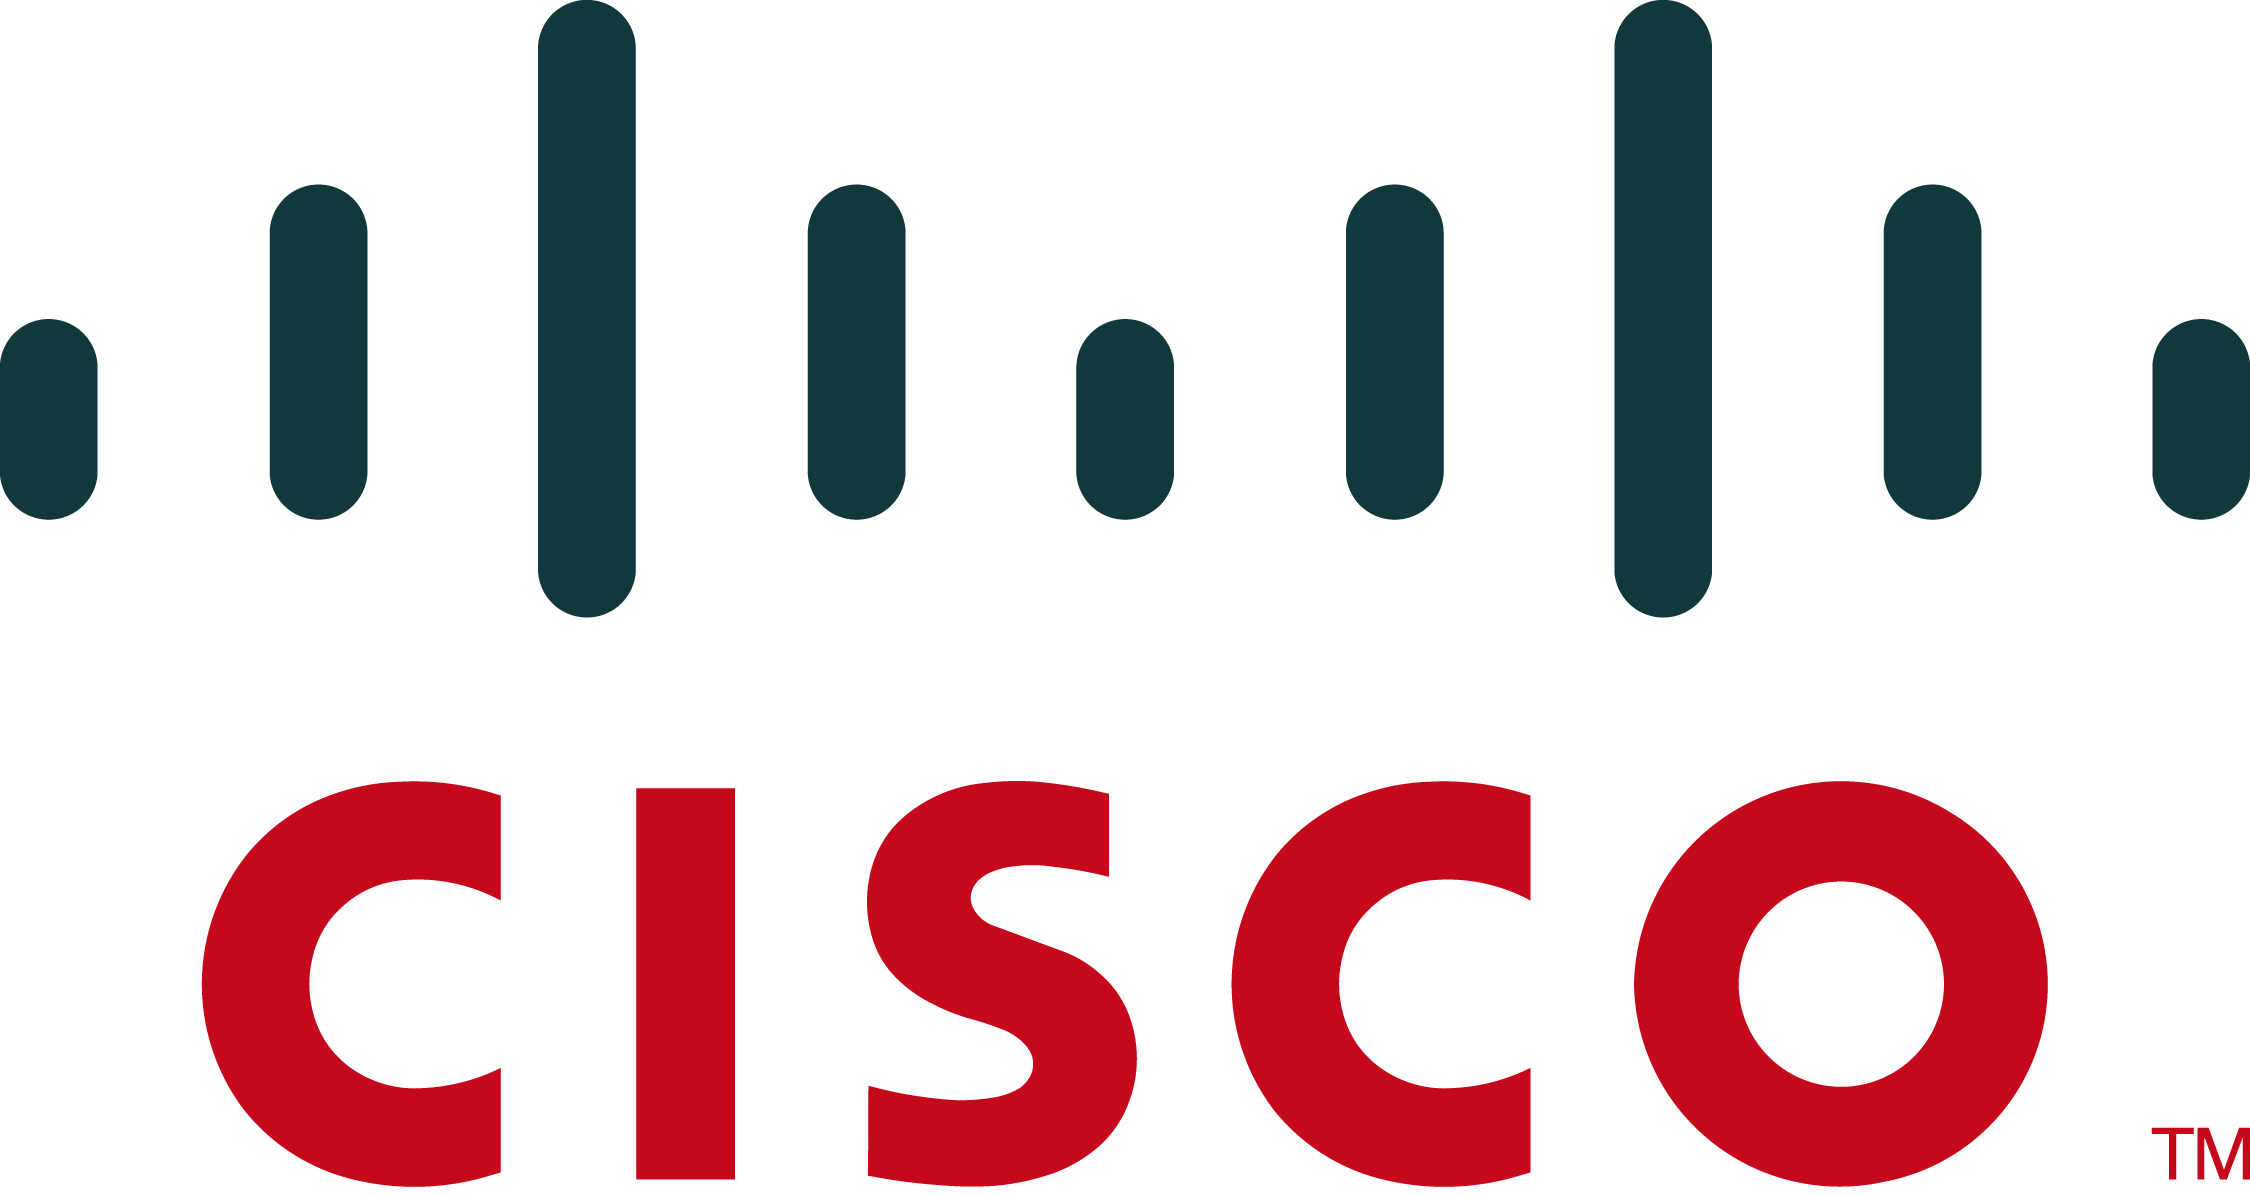 Cisco ASA with FirePOWER Services IPS, Advanced Malware Protection and URL Filtering - Abonnement-Lizenz (3 Jahre)